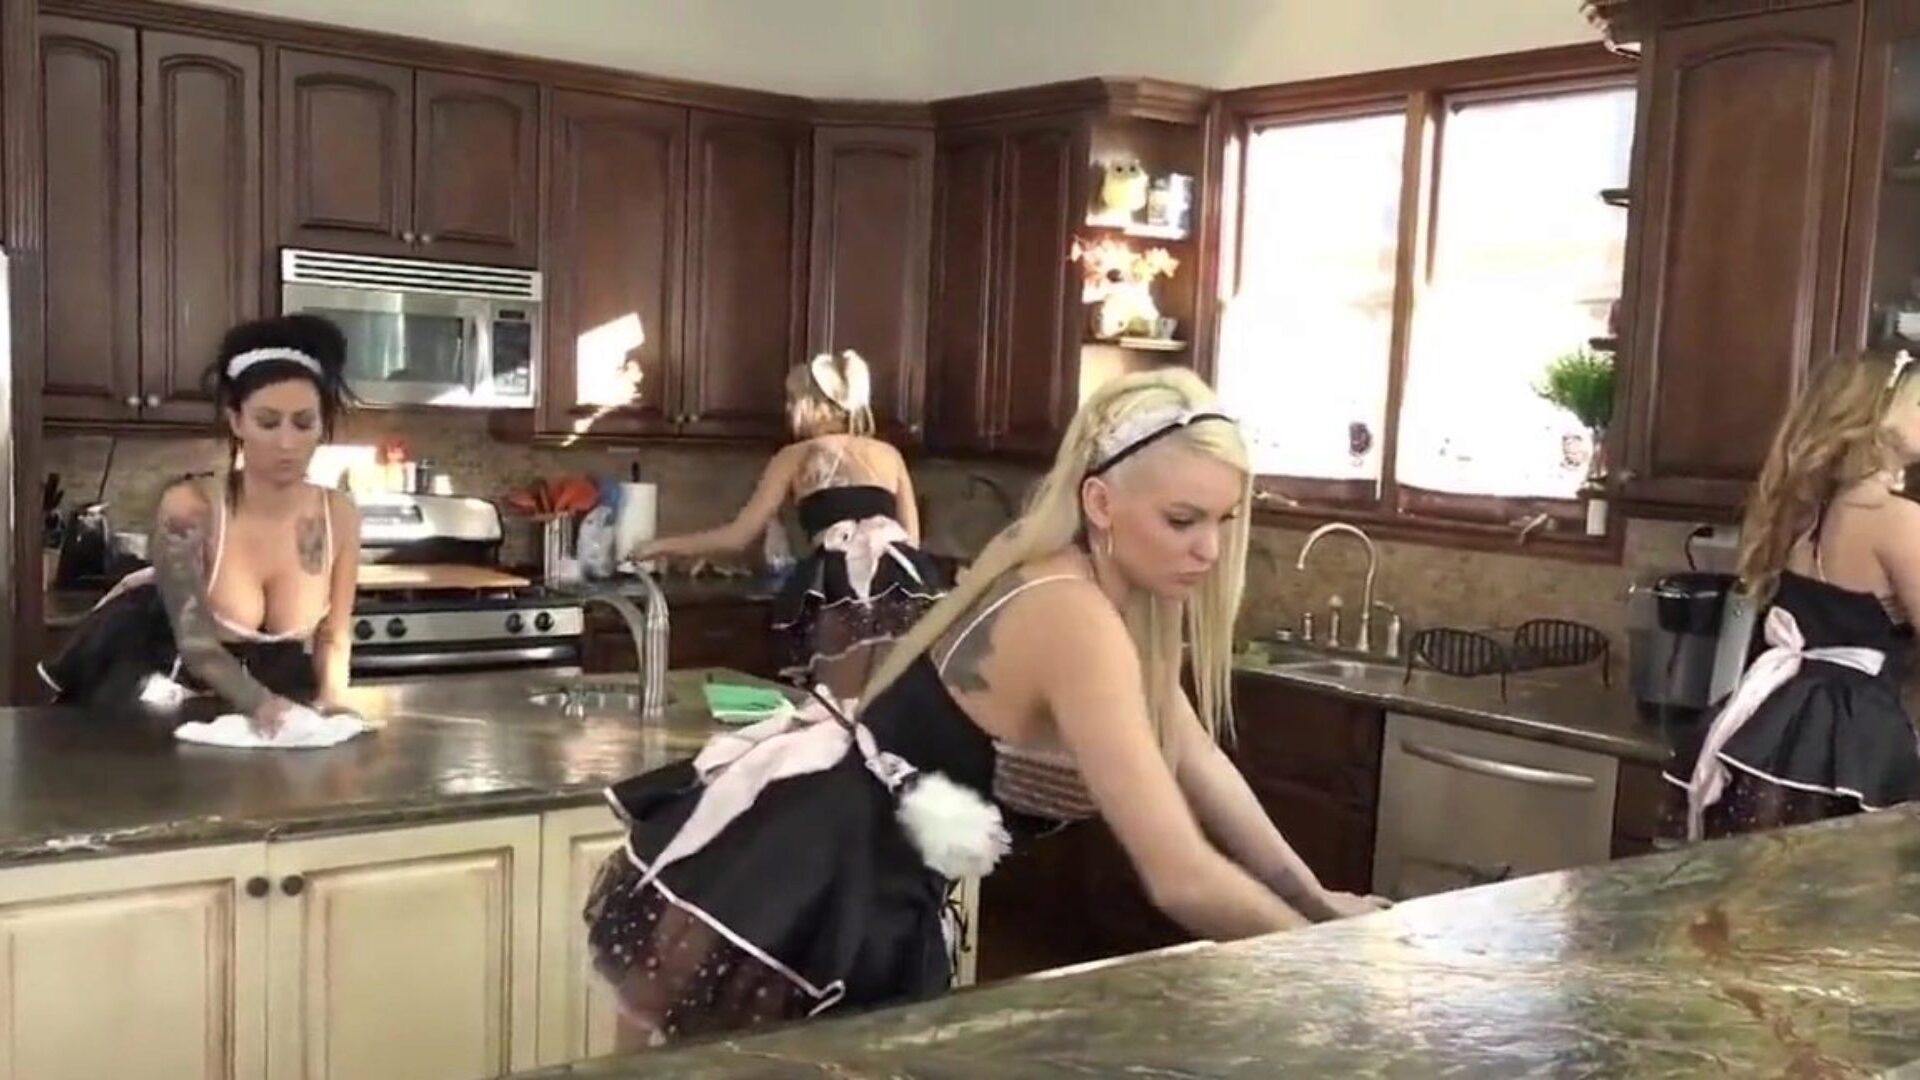 Devilsfilm Busty mother I'd like to fuck Briana Banks Punishes Her Lesbian | xHamster Watch Devilsfilm Busty MILF Briana Banks Punishes Her Lesbian Maid movie on xHamster - the ultimate archive of free mother I'd like to fuck Lesbian Tube & Busty Maid HD porn tube clips